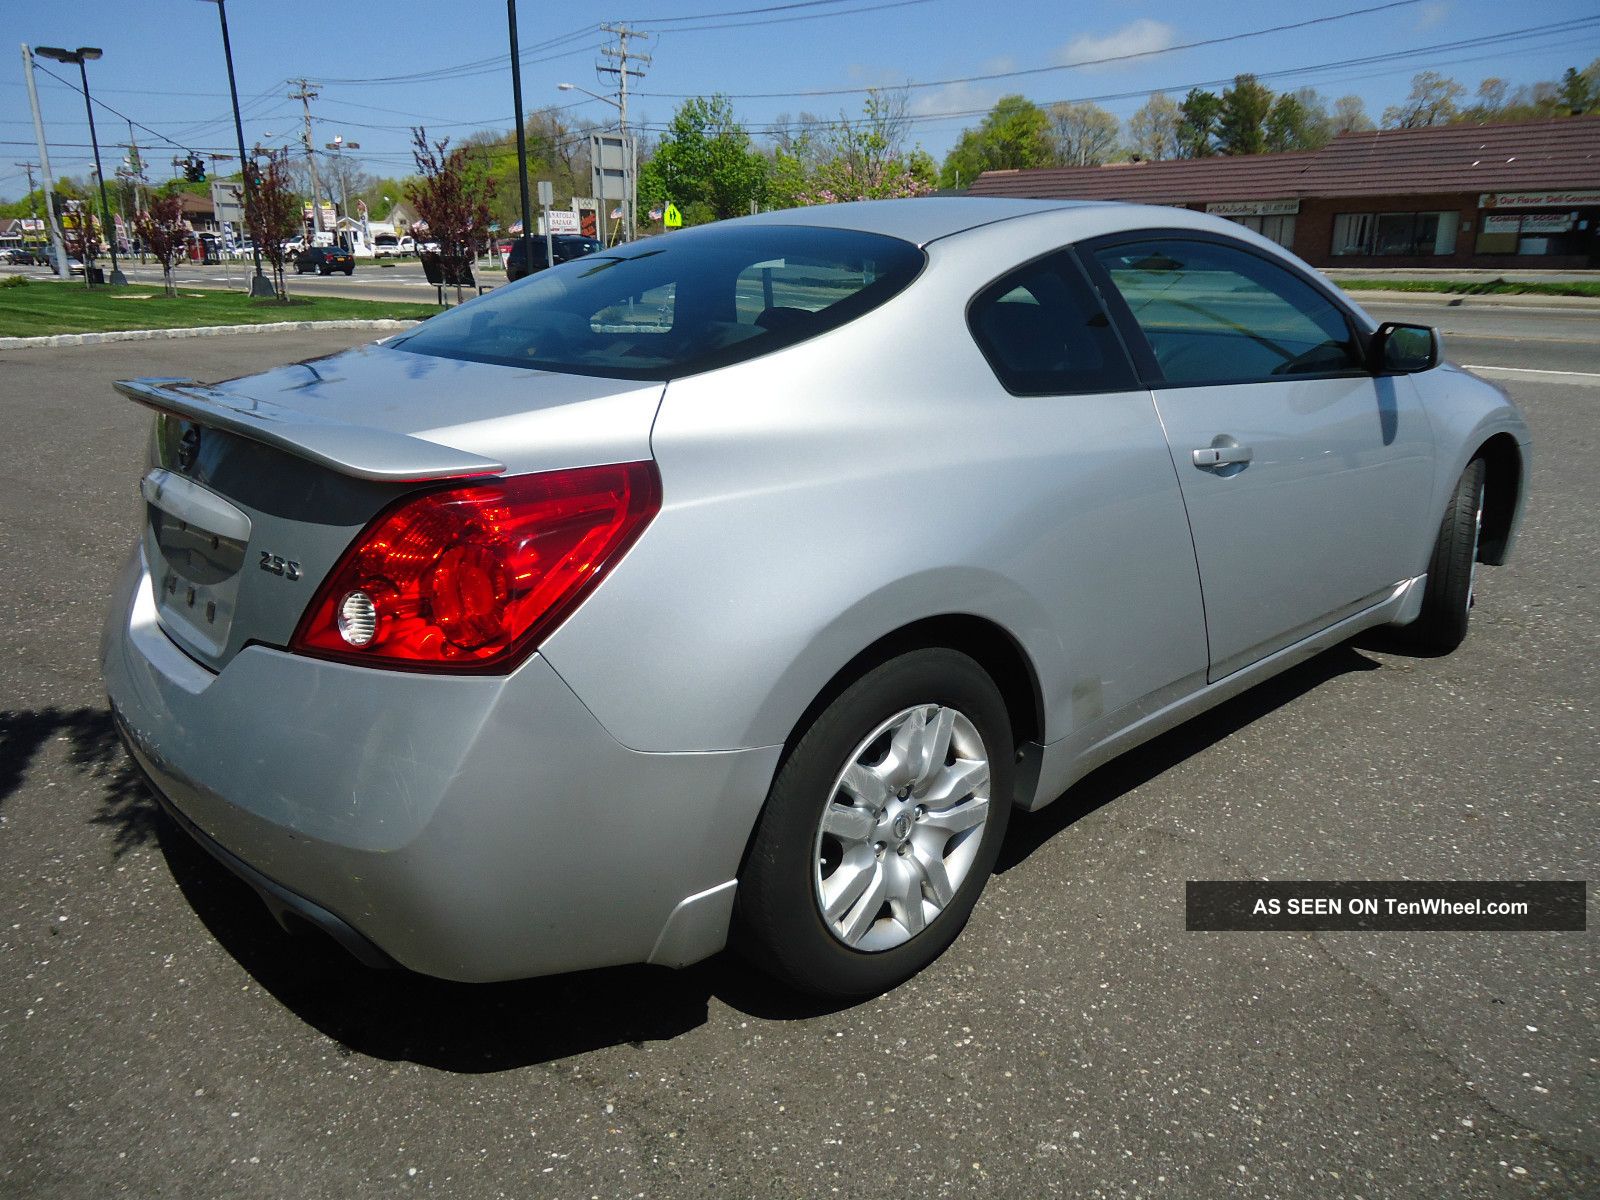 2Dr nissan altima coupe